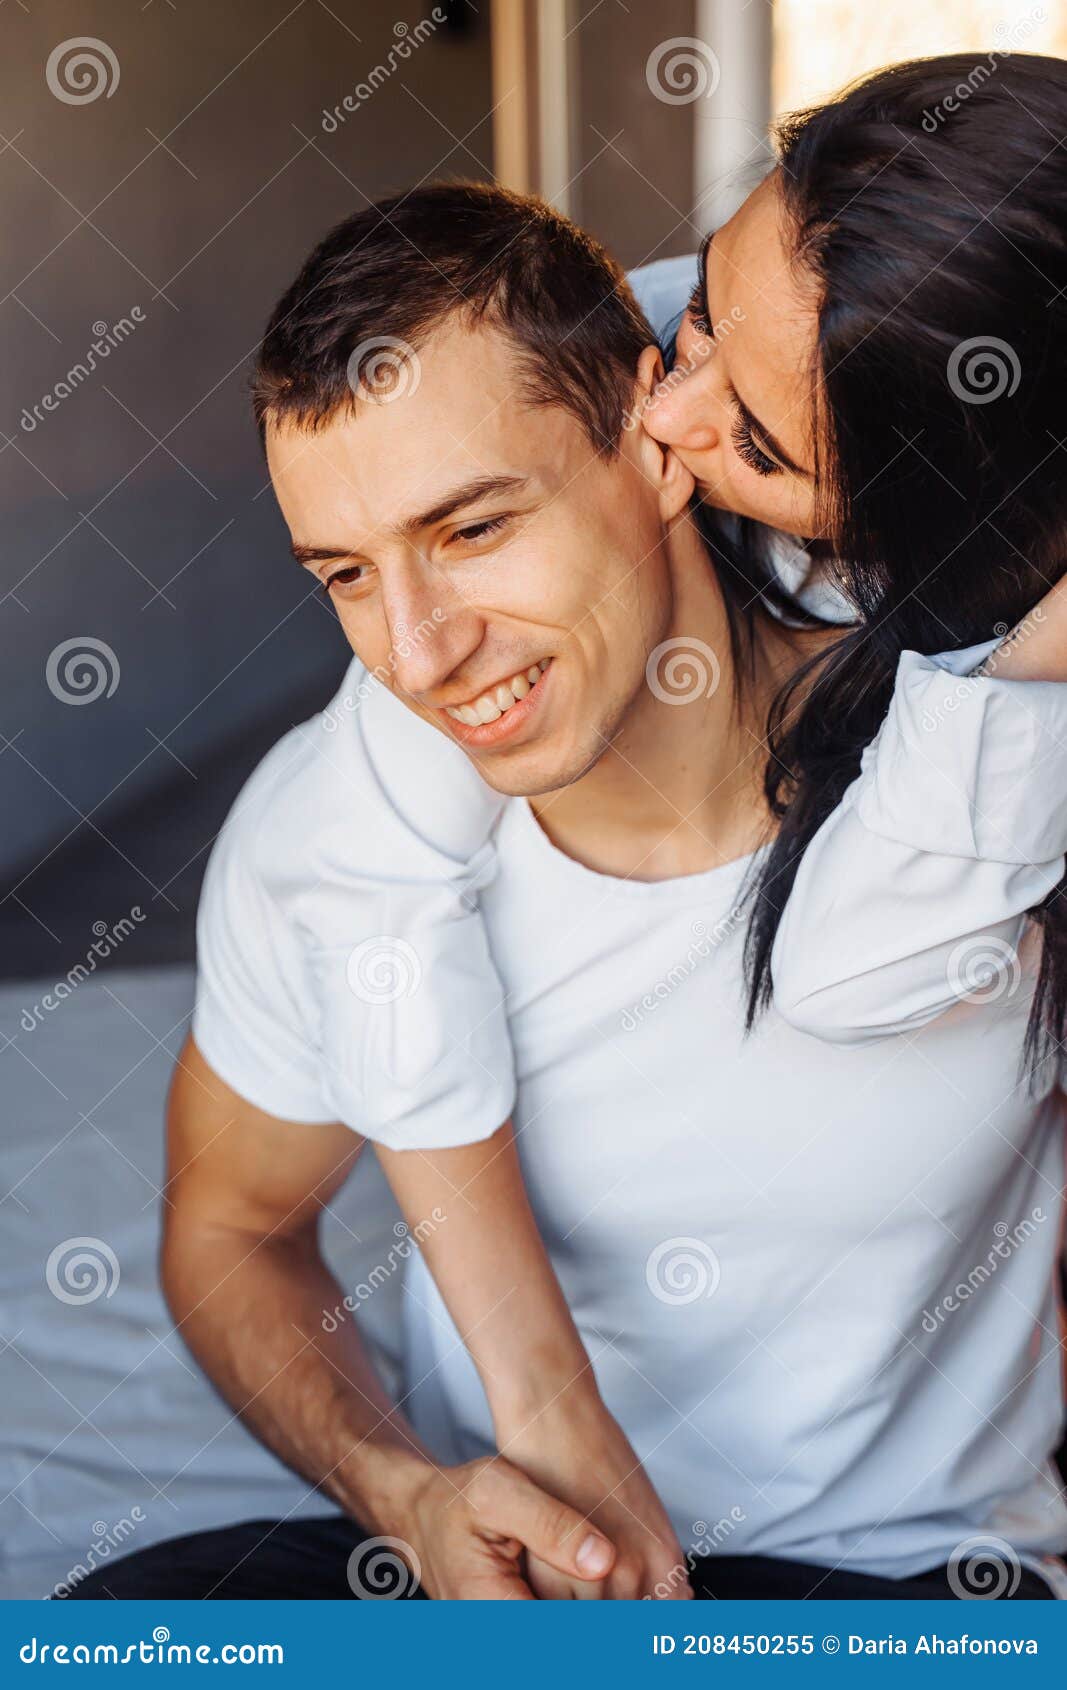 Man Kissing Woman Underwear Stock Photos pic picture